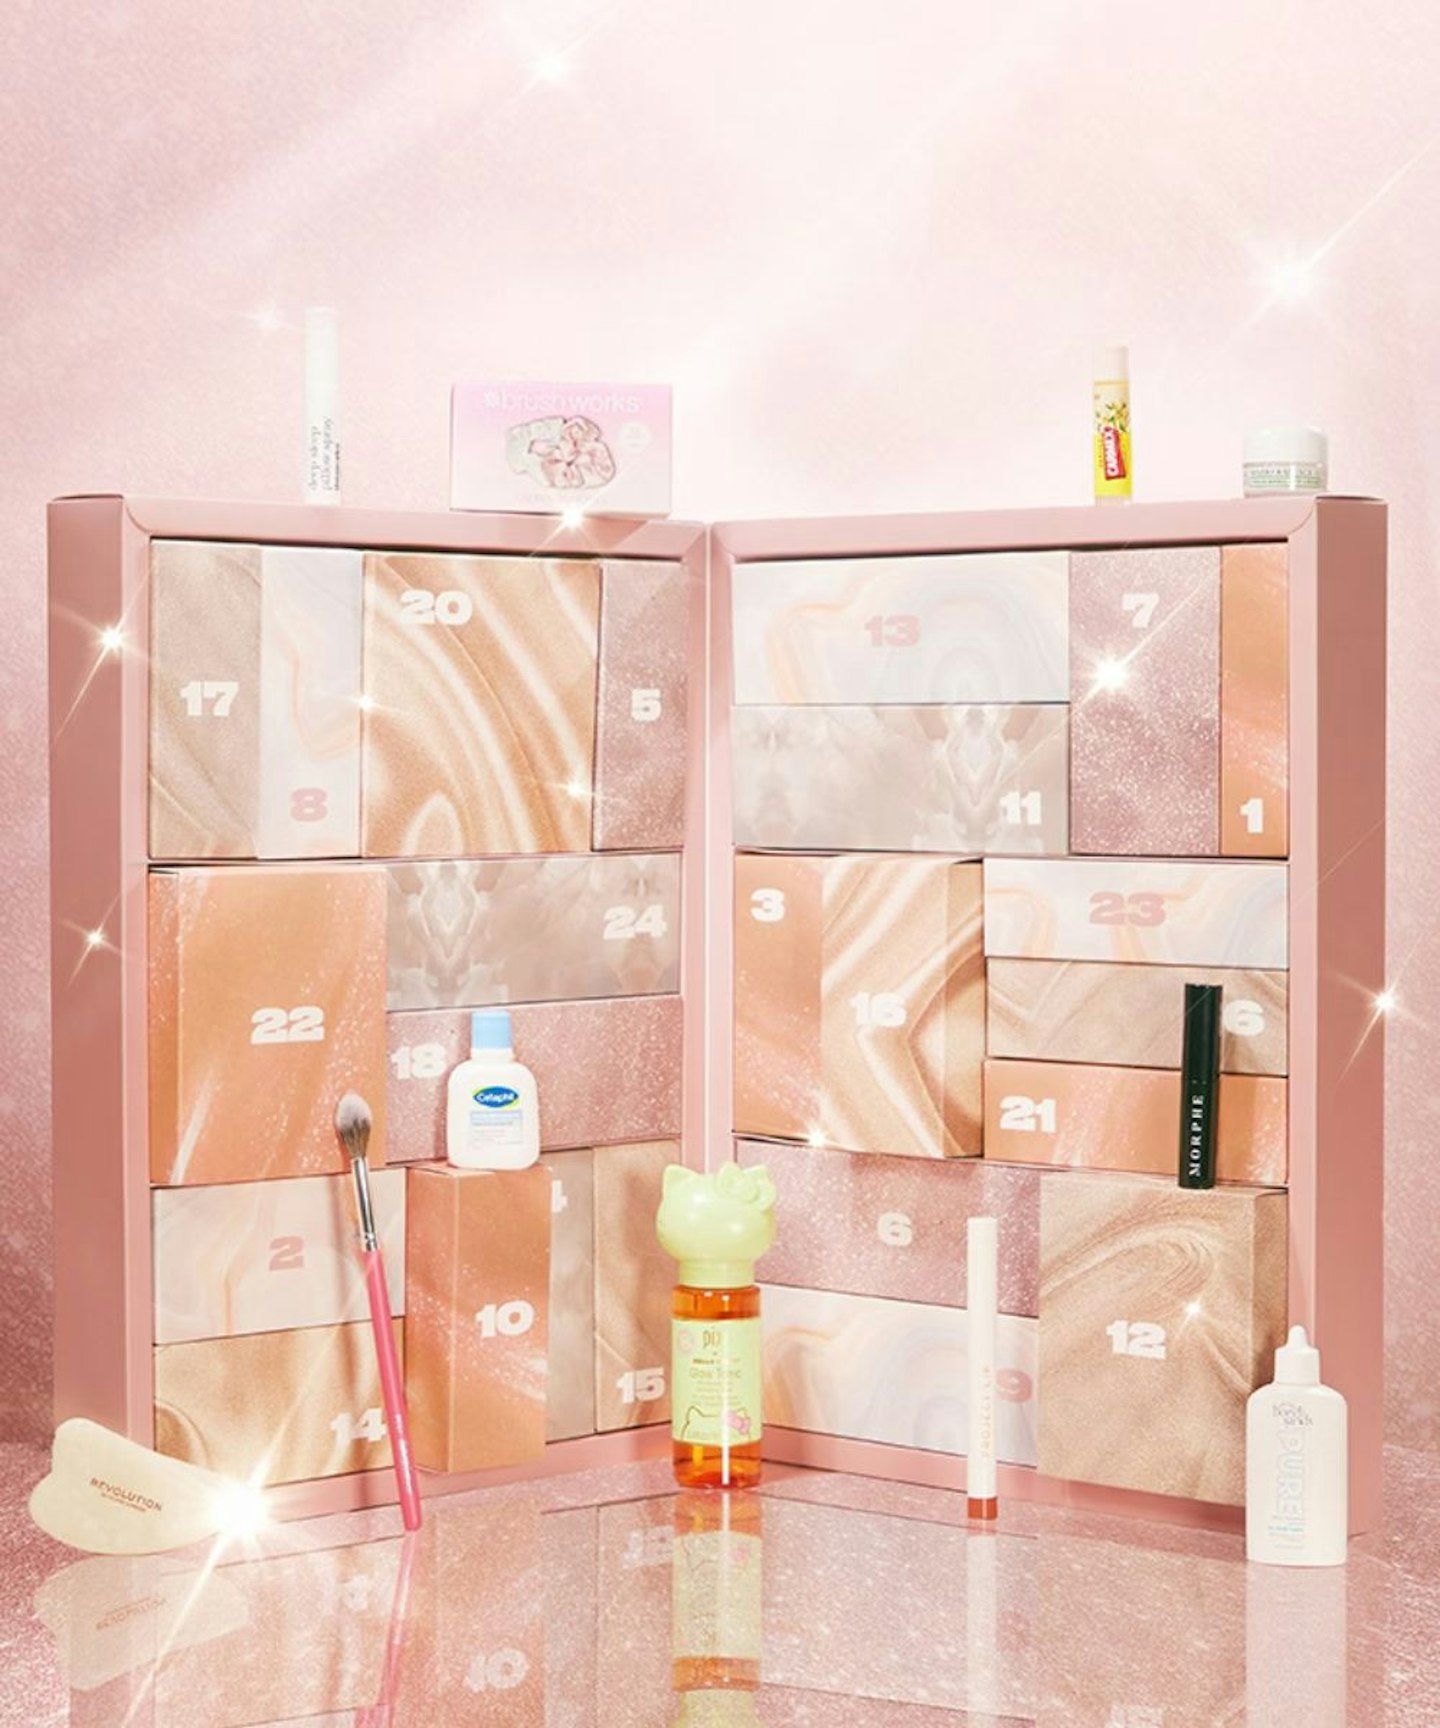 Boots' first ever premium beauty advent calendar is filled with